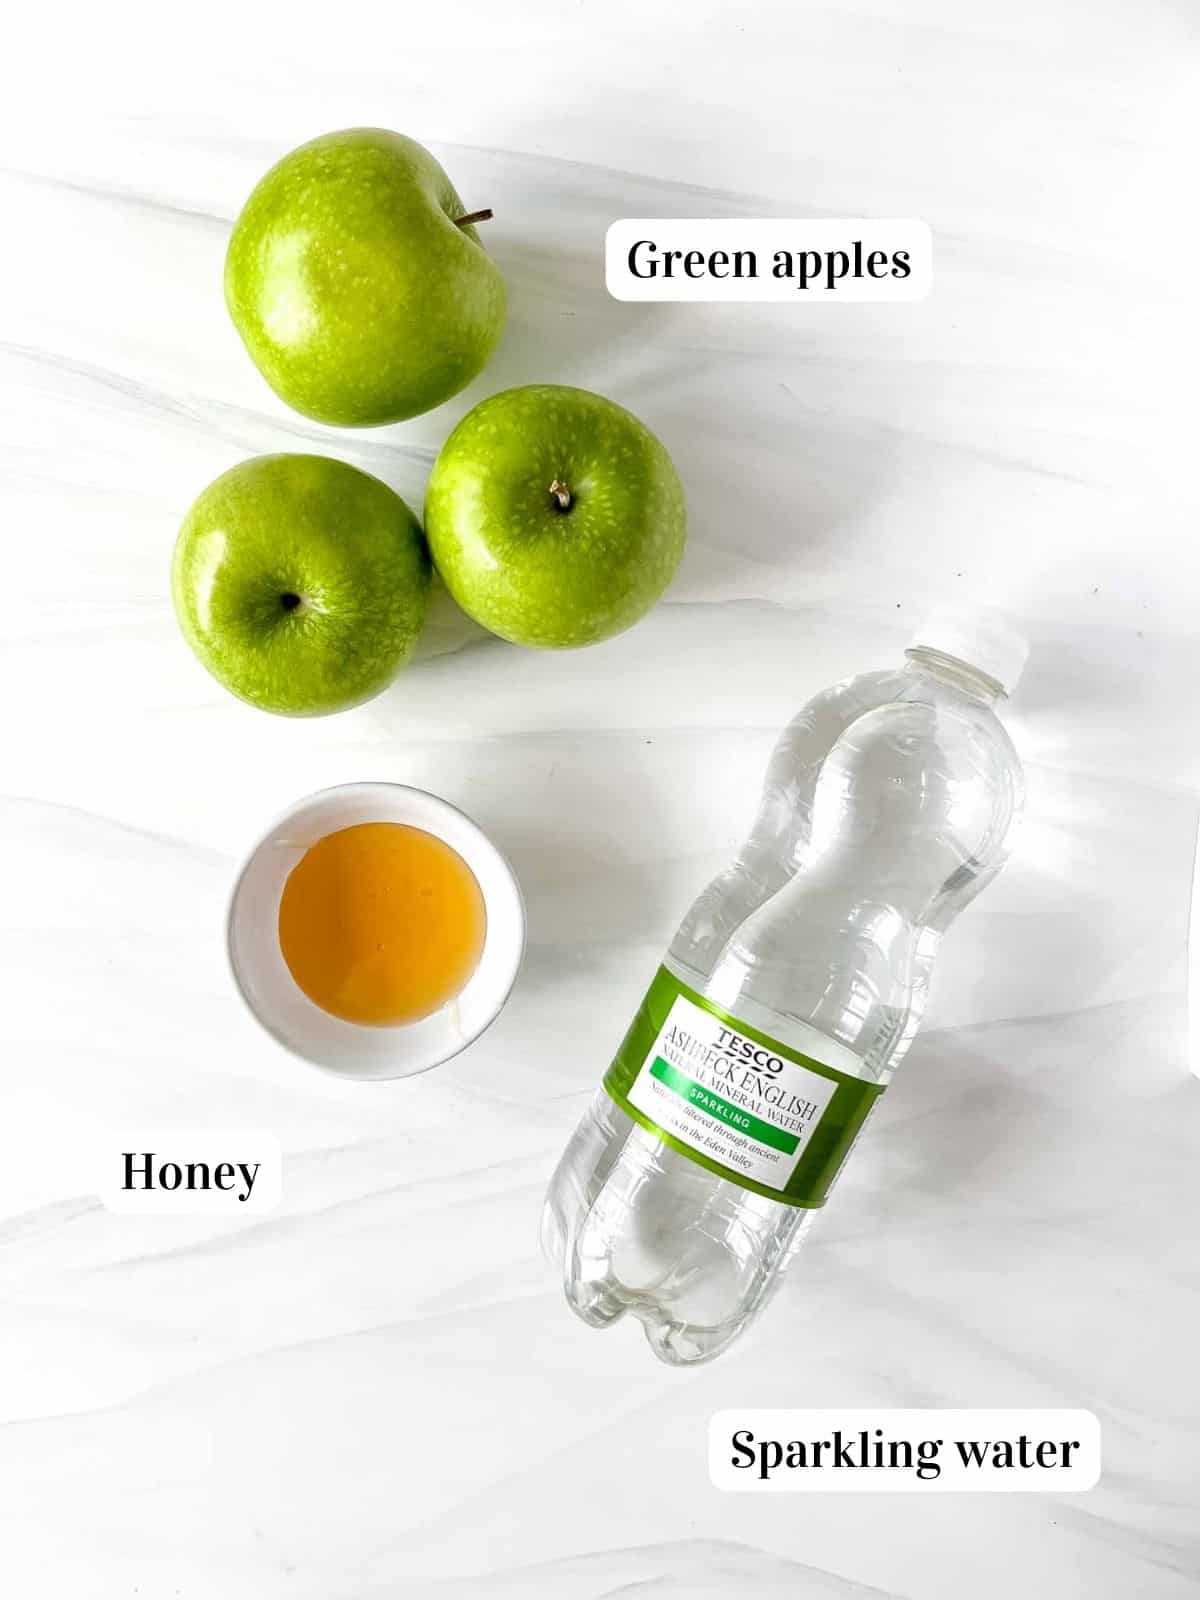 individually labelled green apples, bottle of sparkling water and small white bowl of honey.